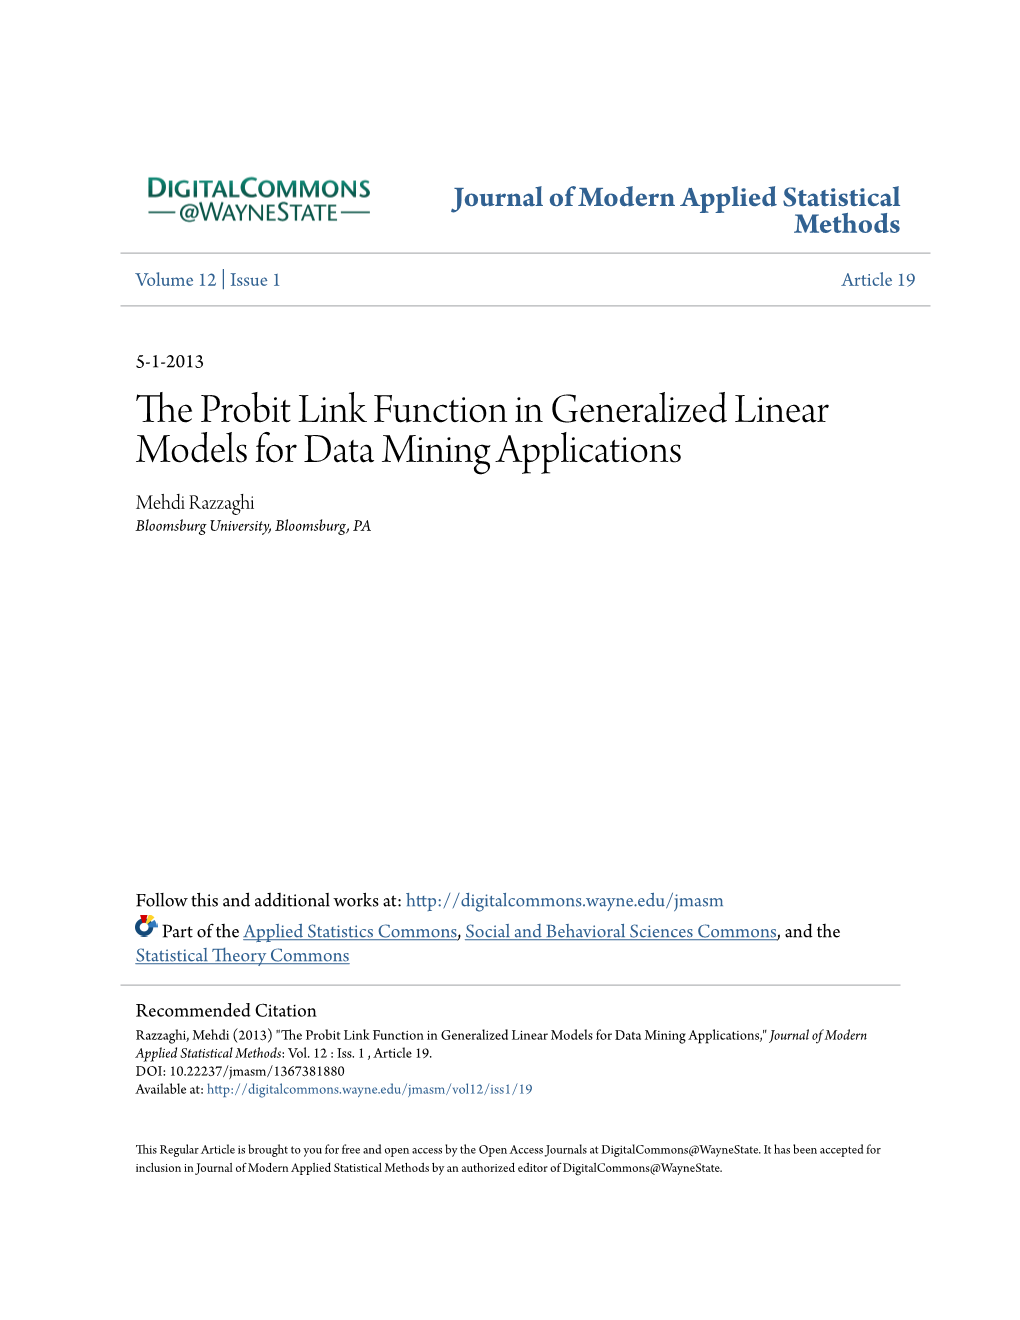 The Probit Link Function in Generalized Linear Models for Data Mining Applications